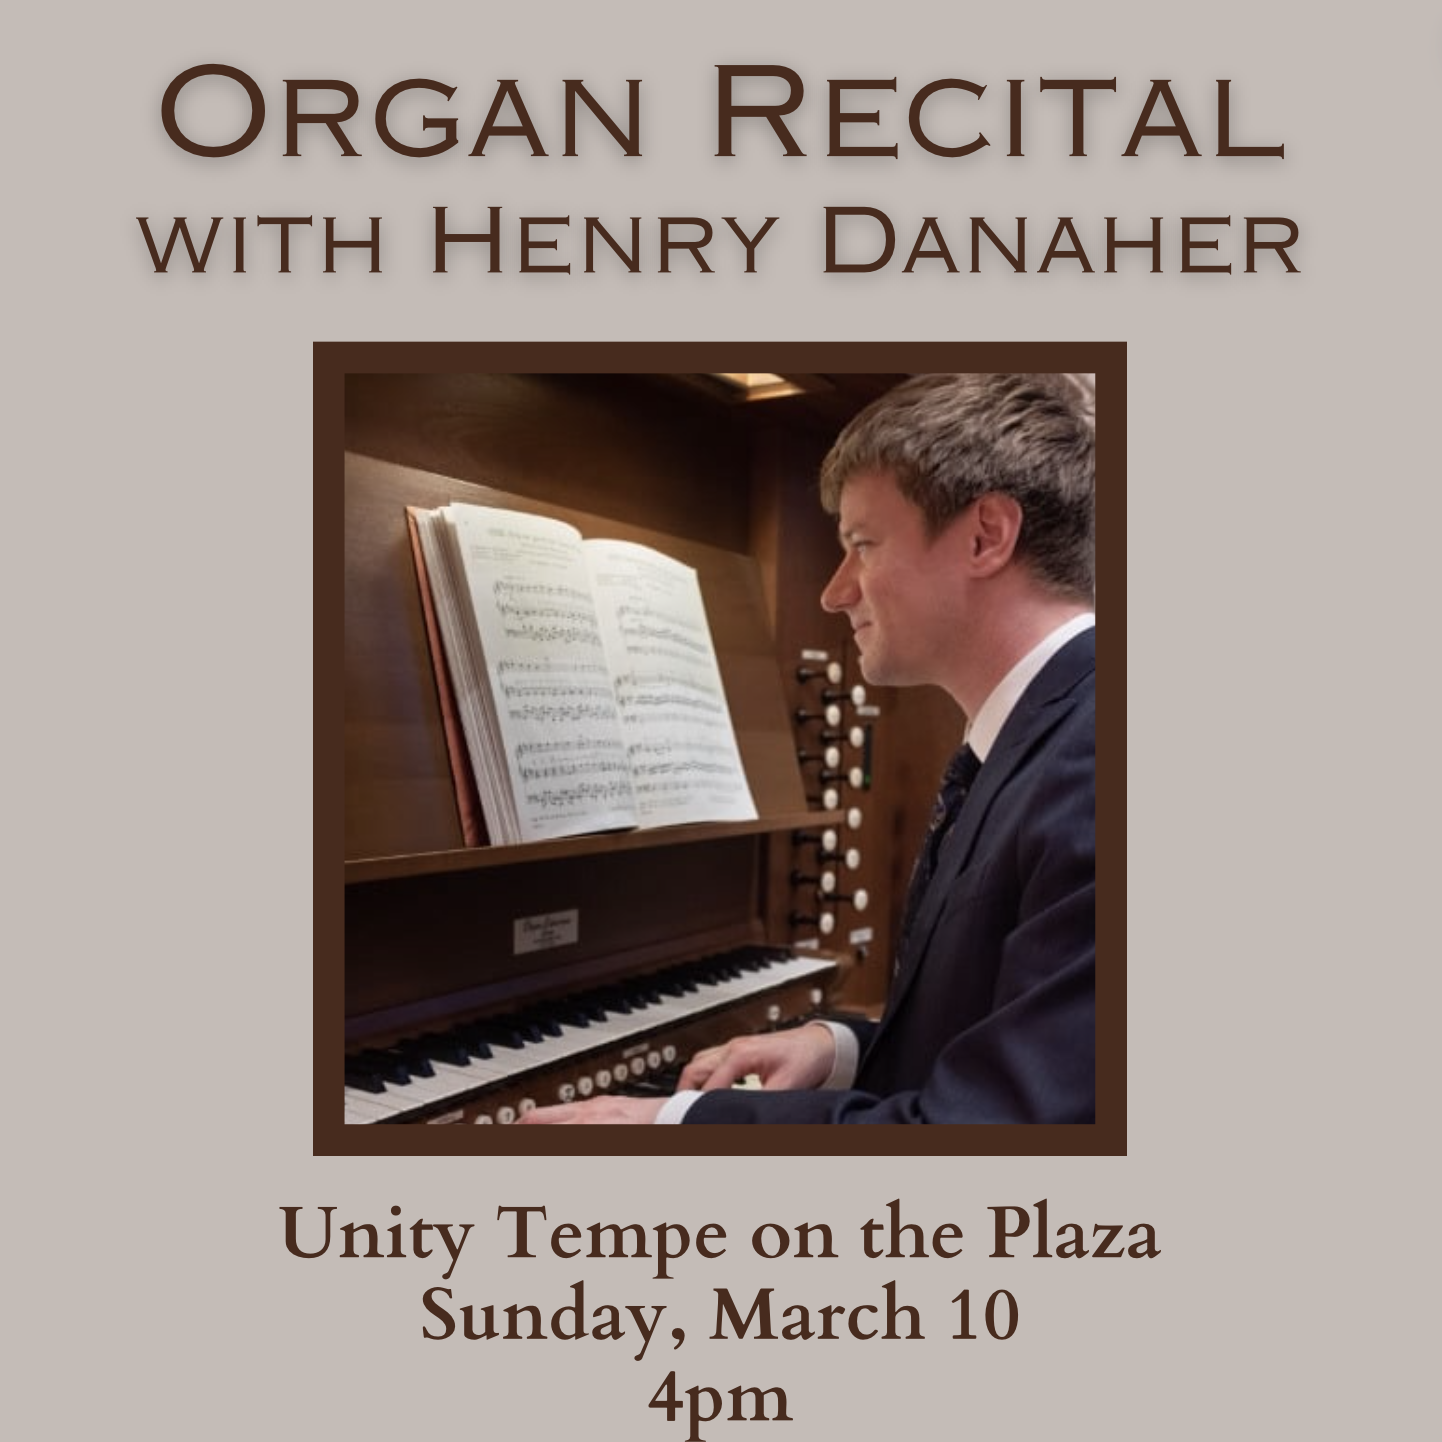 Organ Recital With Henry Danaher